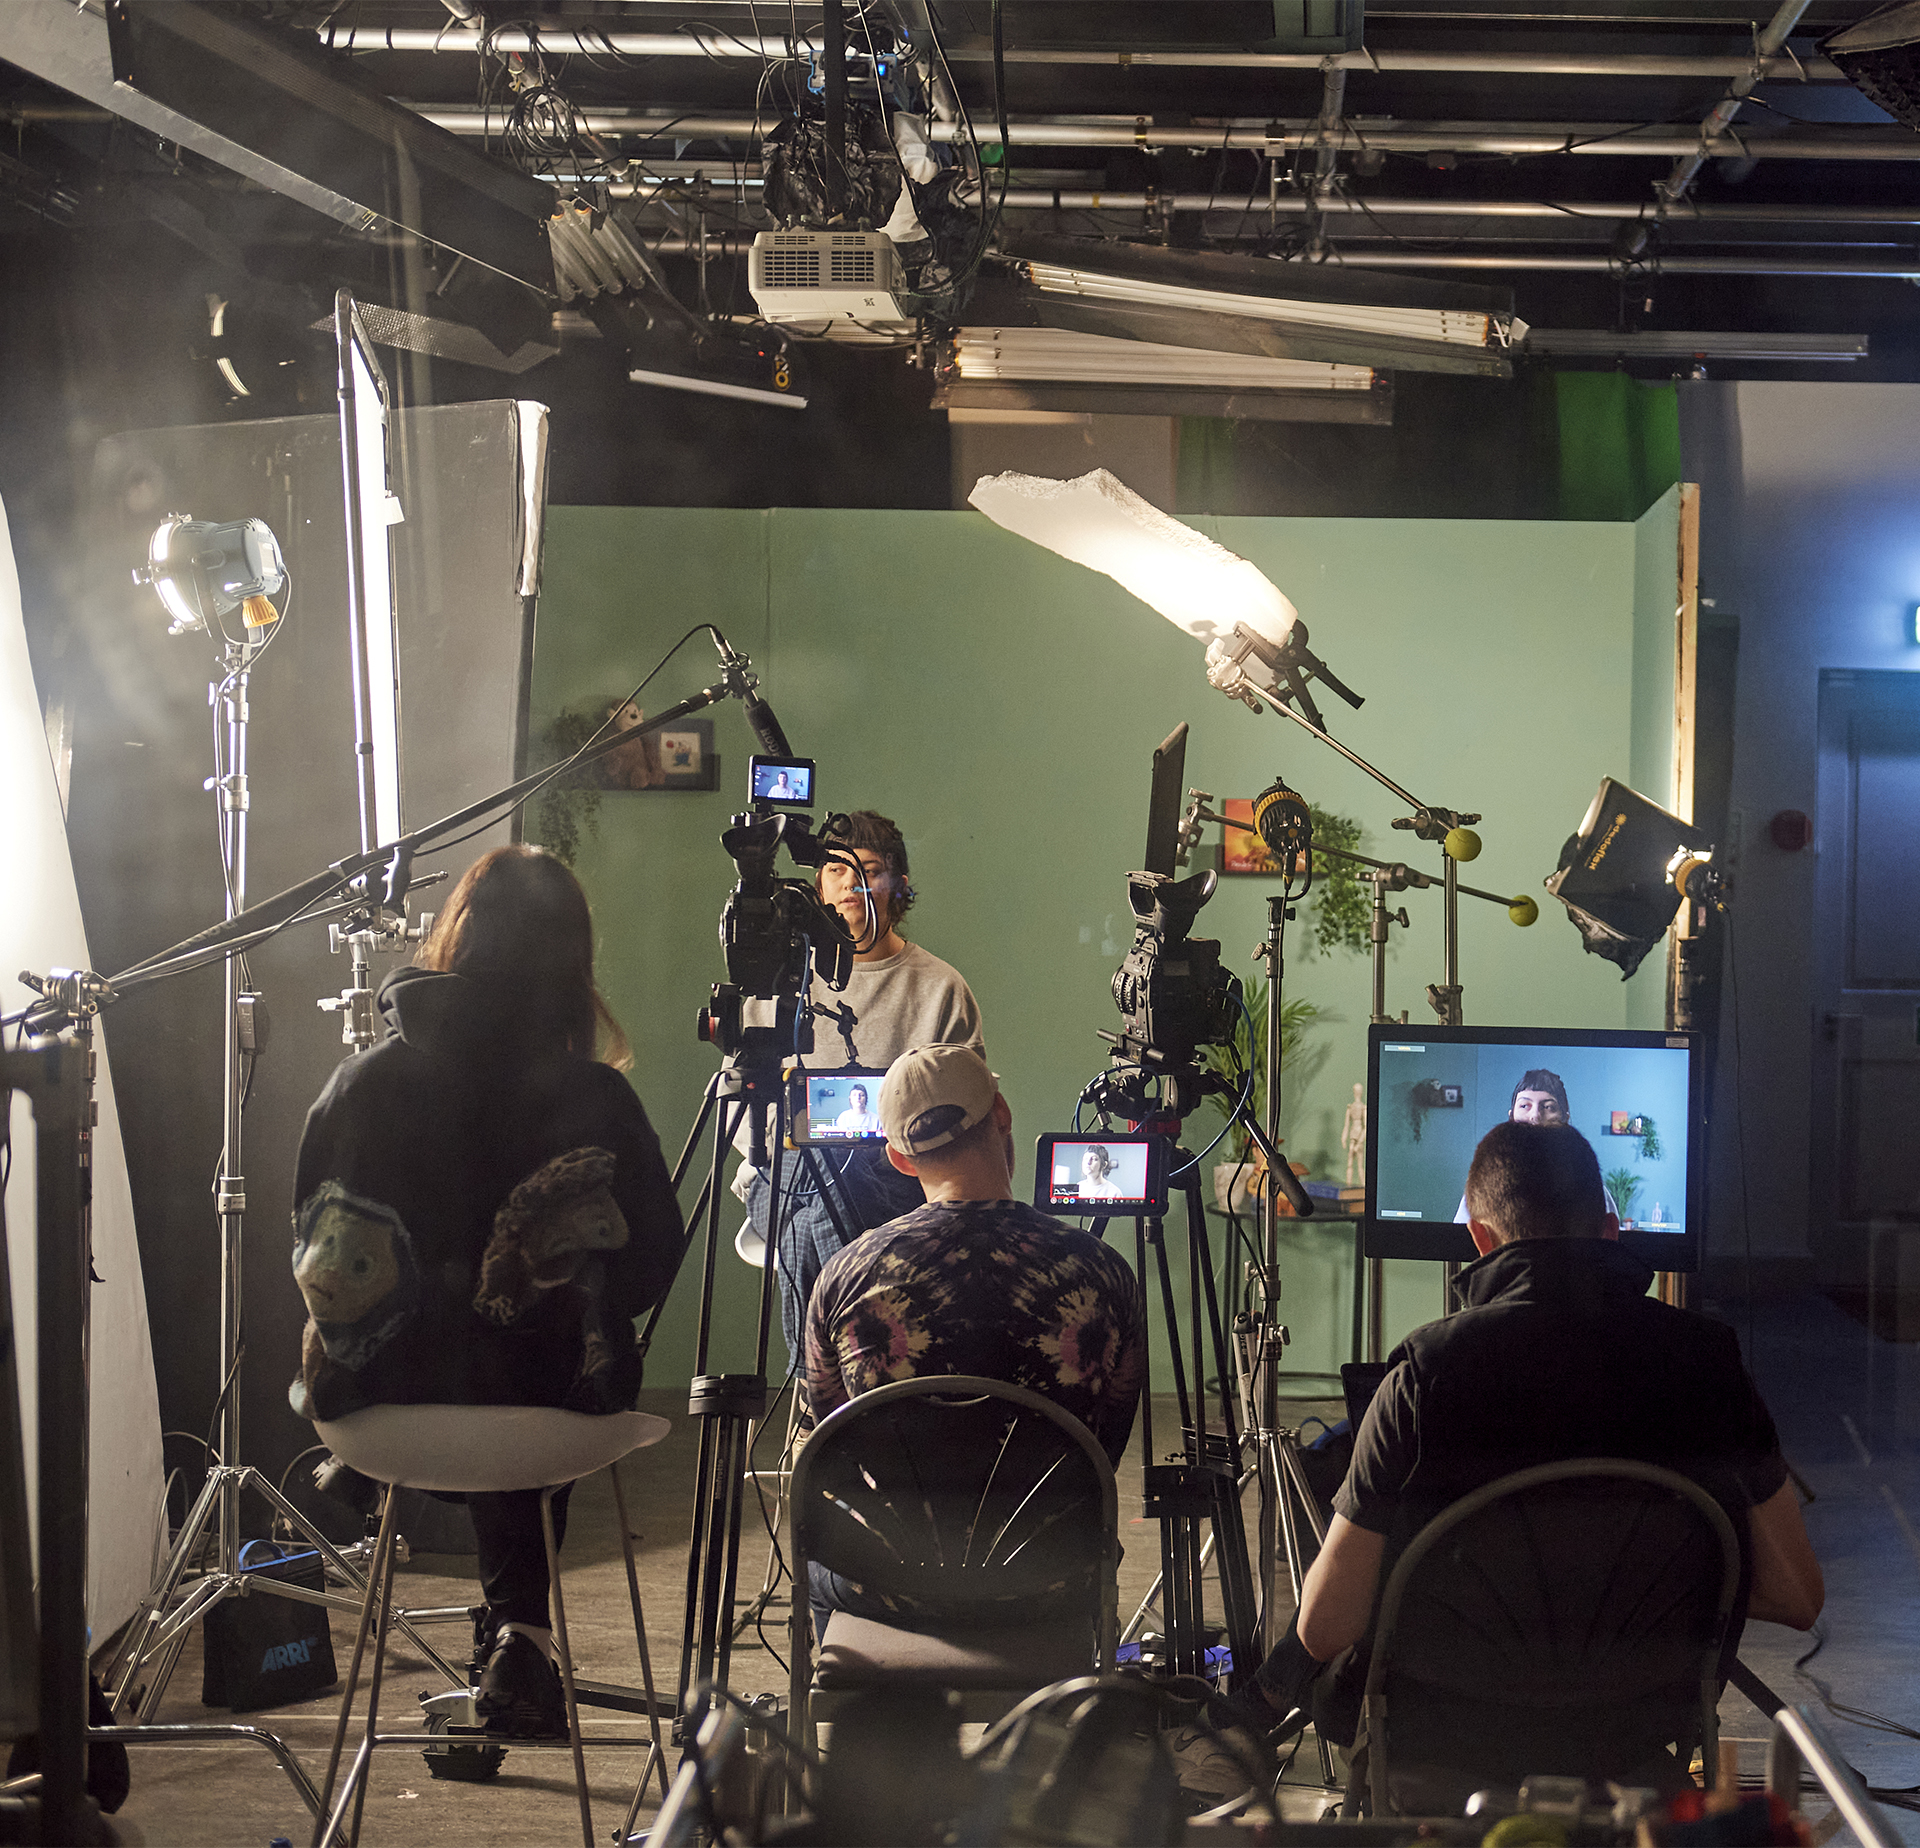 Film students working on a set built in the Film Studio with an Acting student.